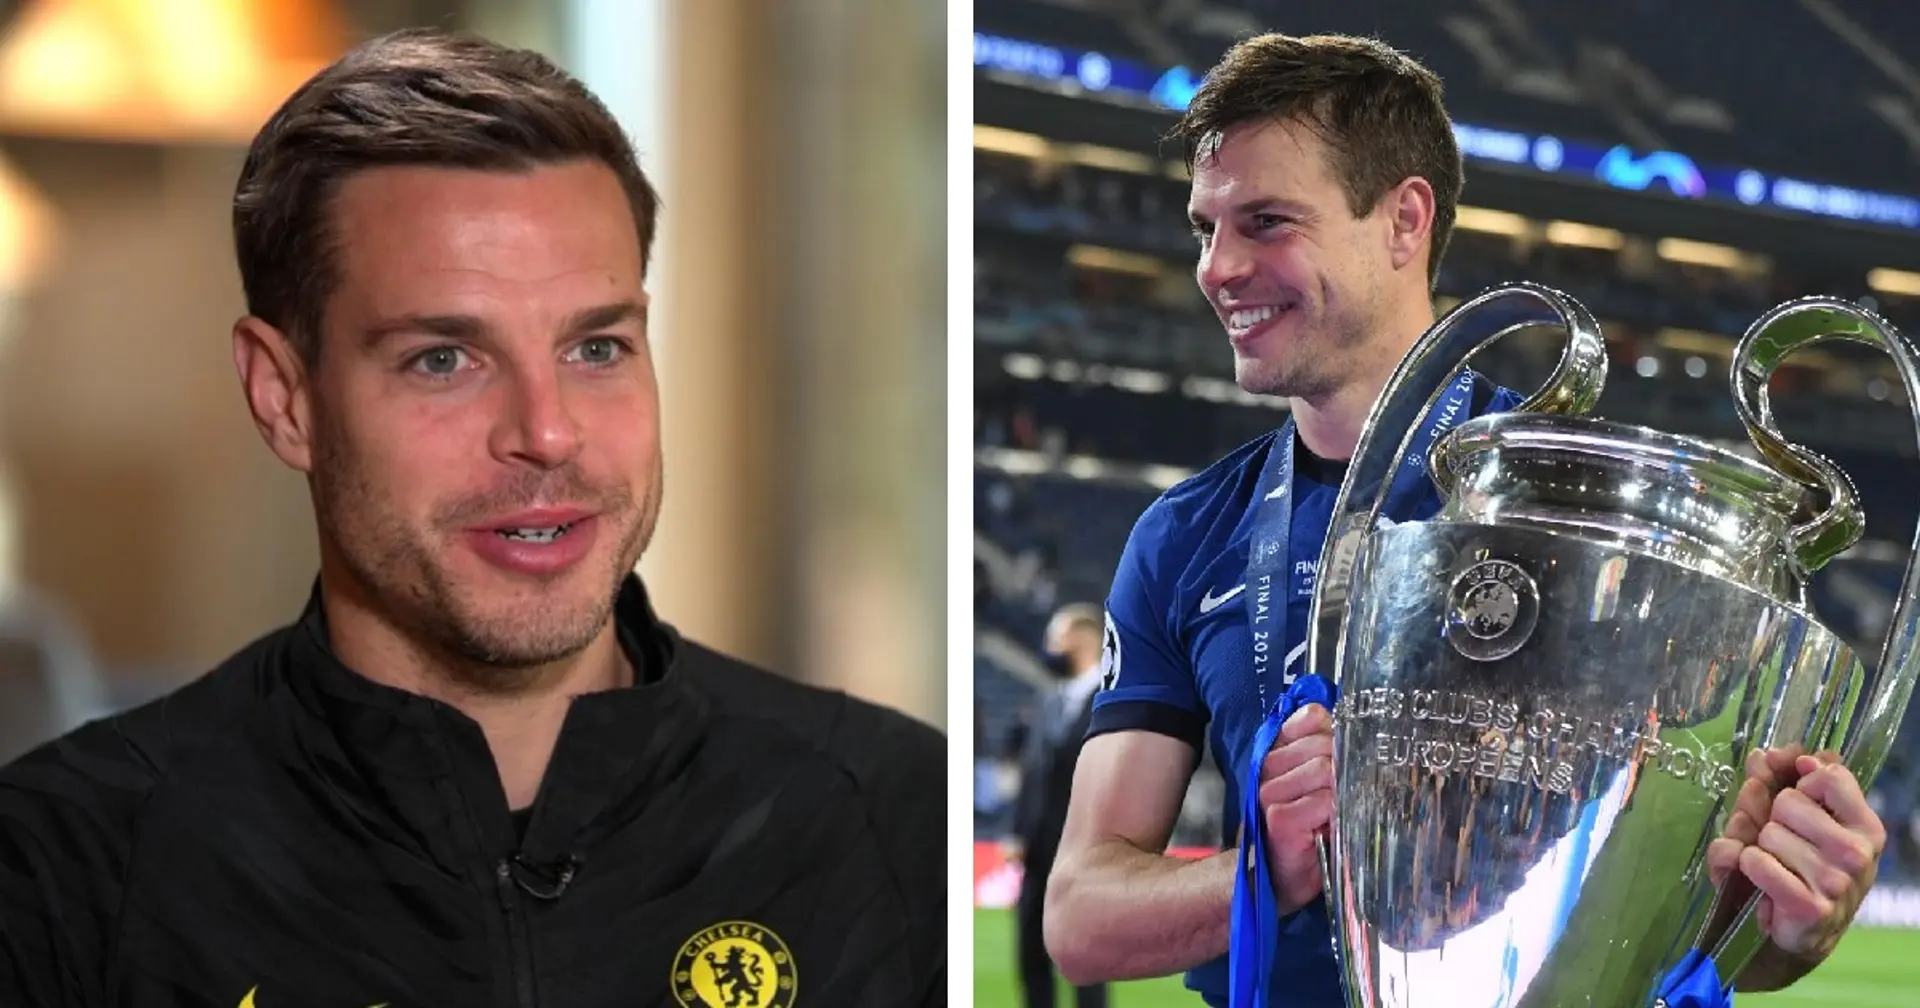 'There is never a moment when you say well that's it': Azpilicueta still hungry for titles